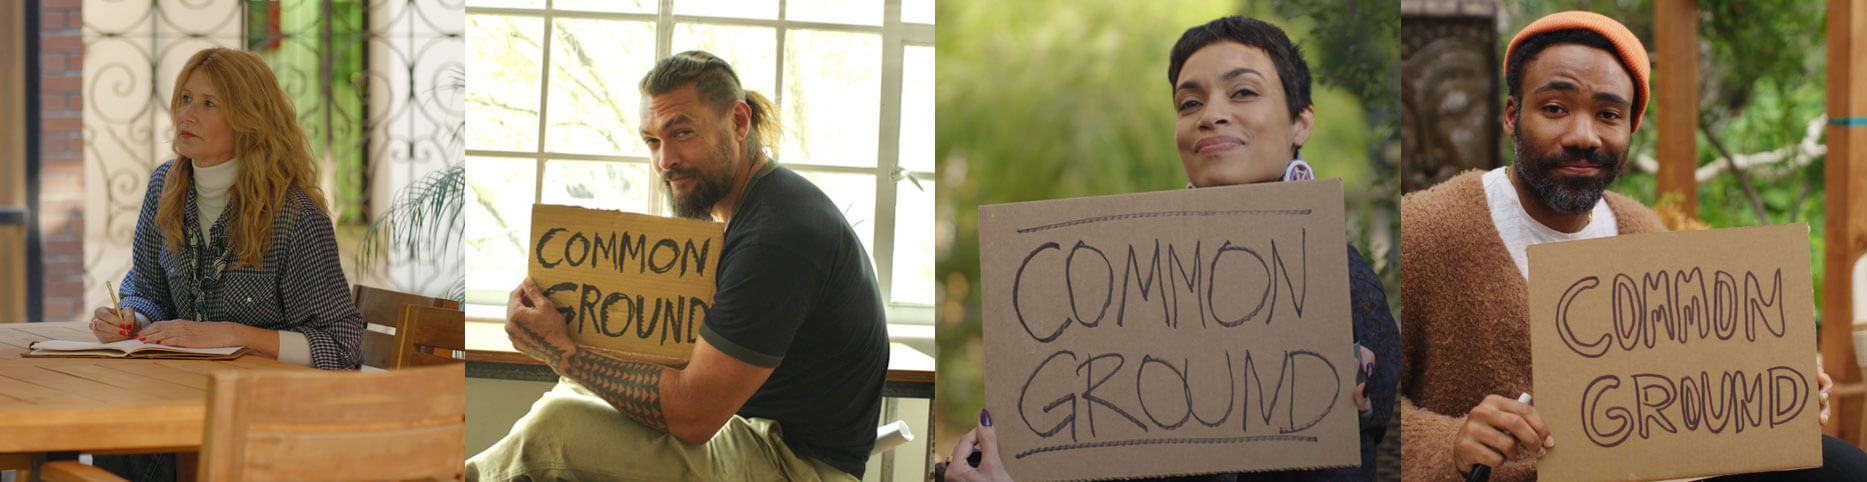 See Common Ground at Images Cinema